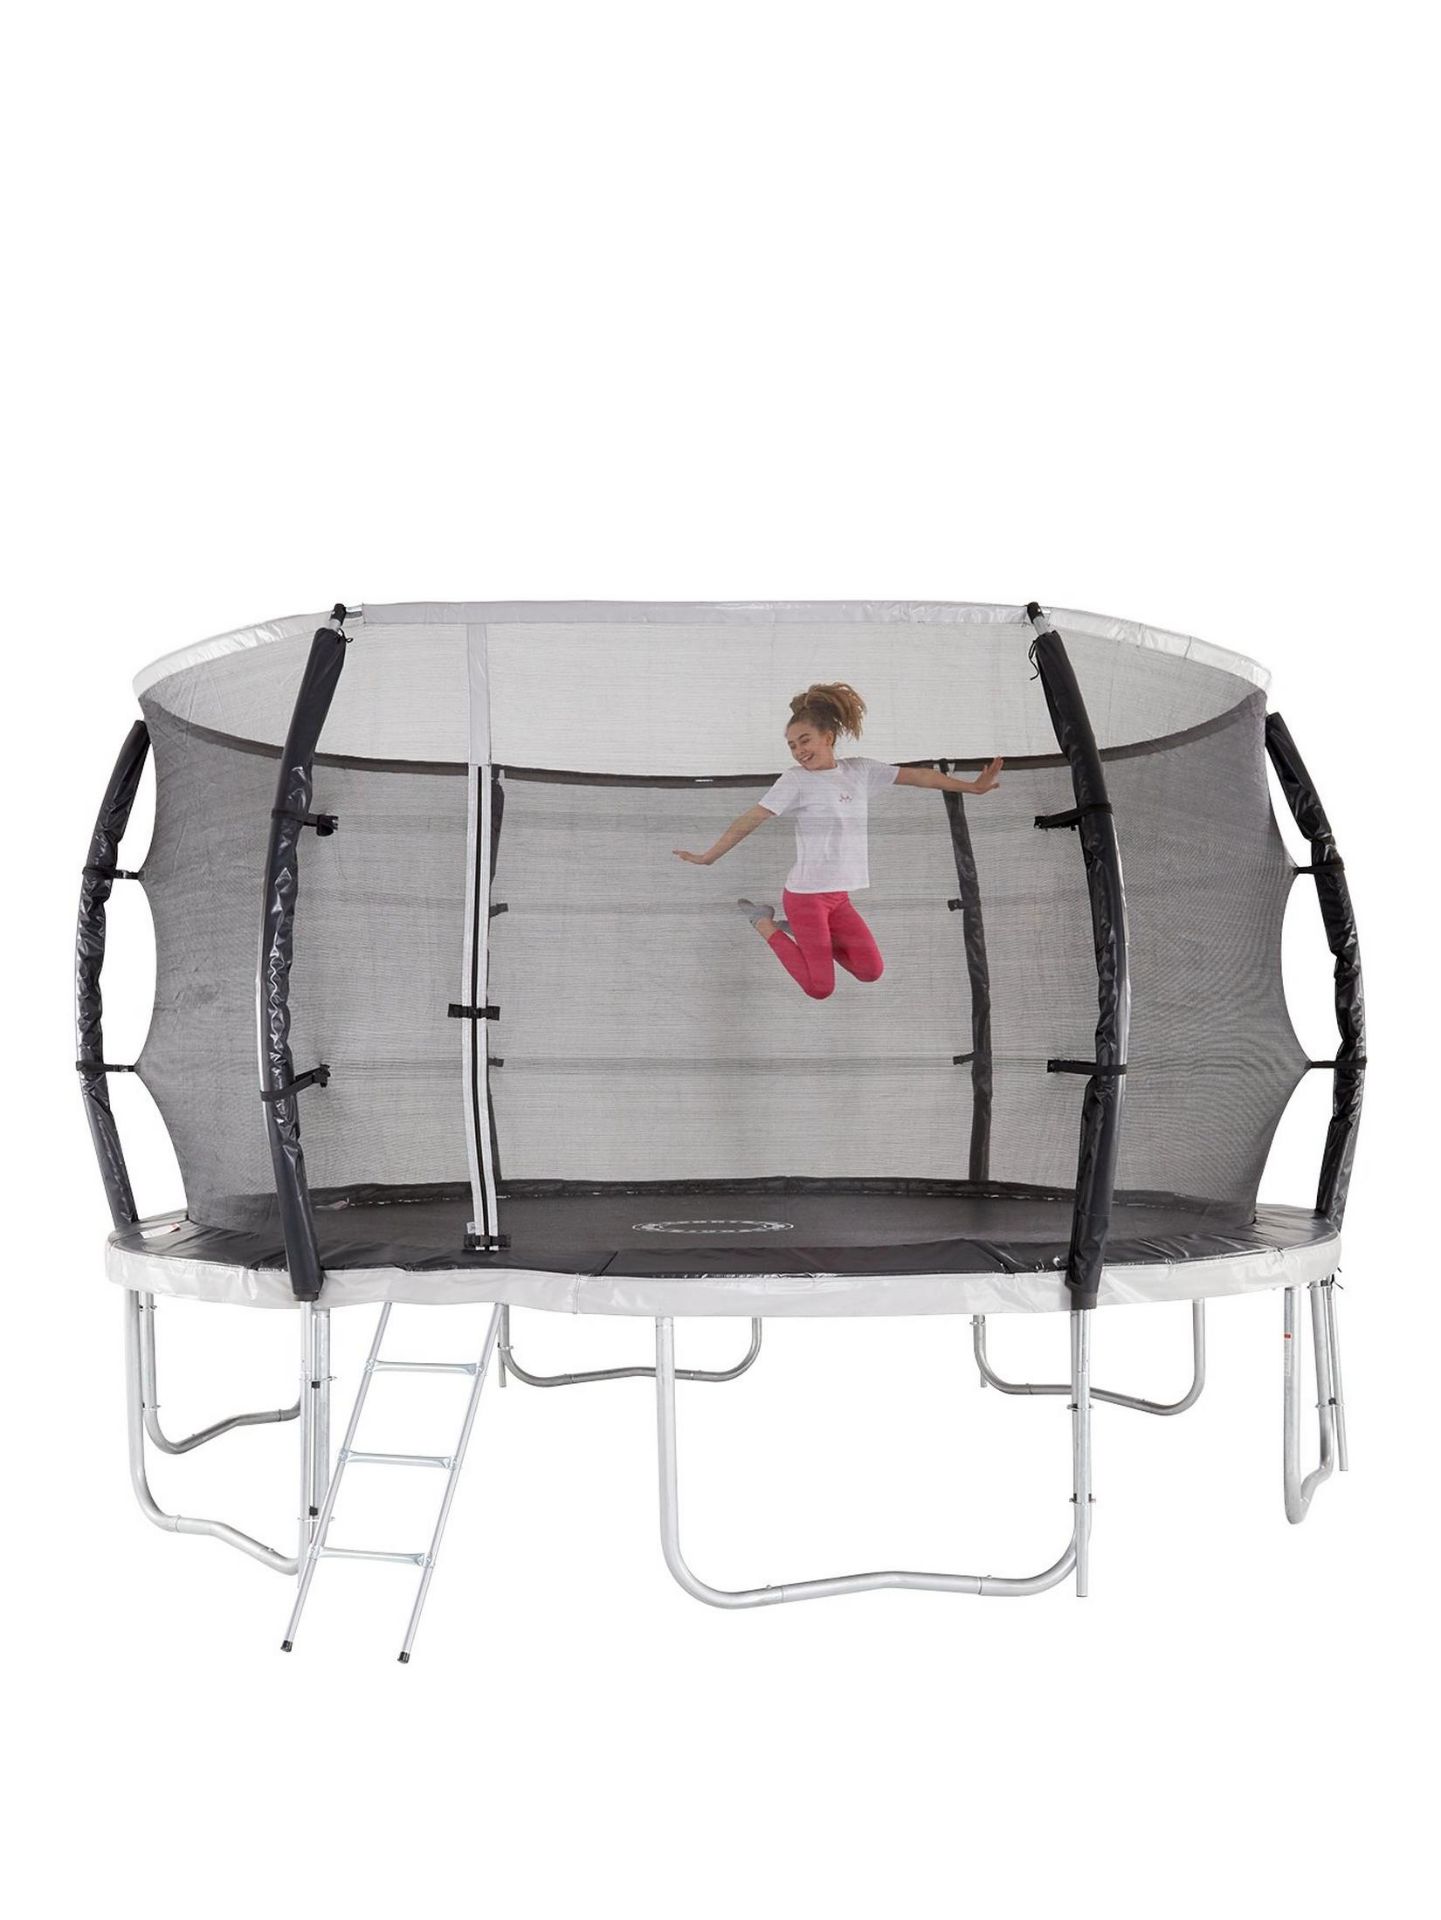 SPORTSPOWER TITAN 14FT TRAMPOLINE WITH ENCLOSURE AND LADDER - RRP £449